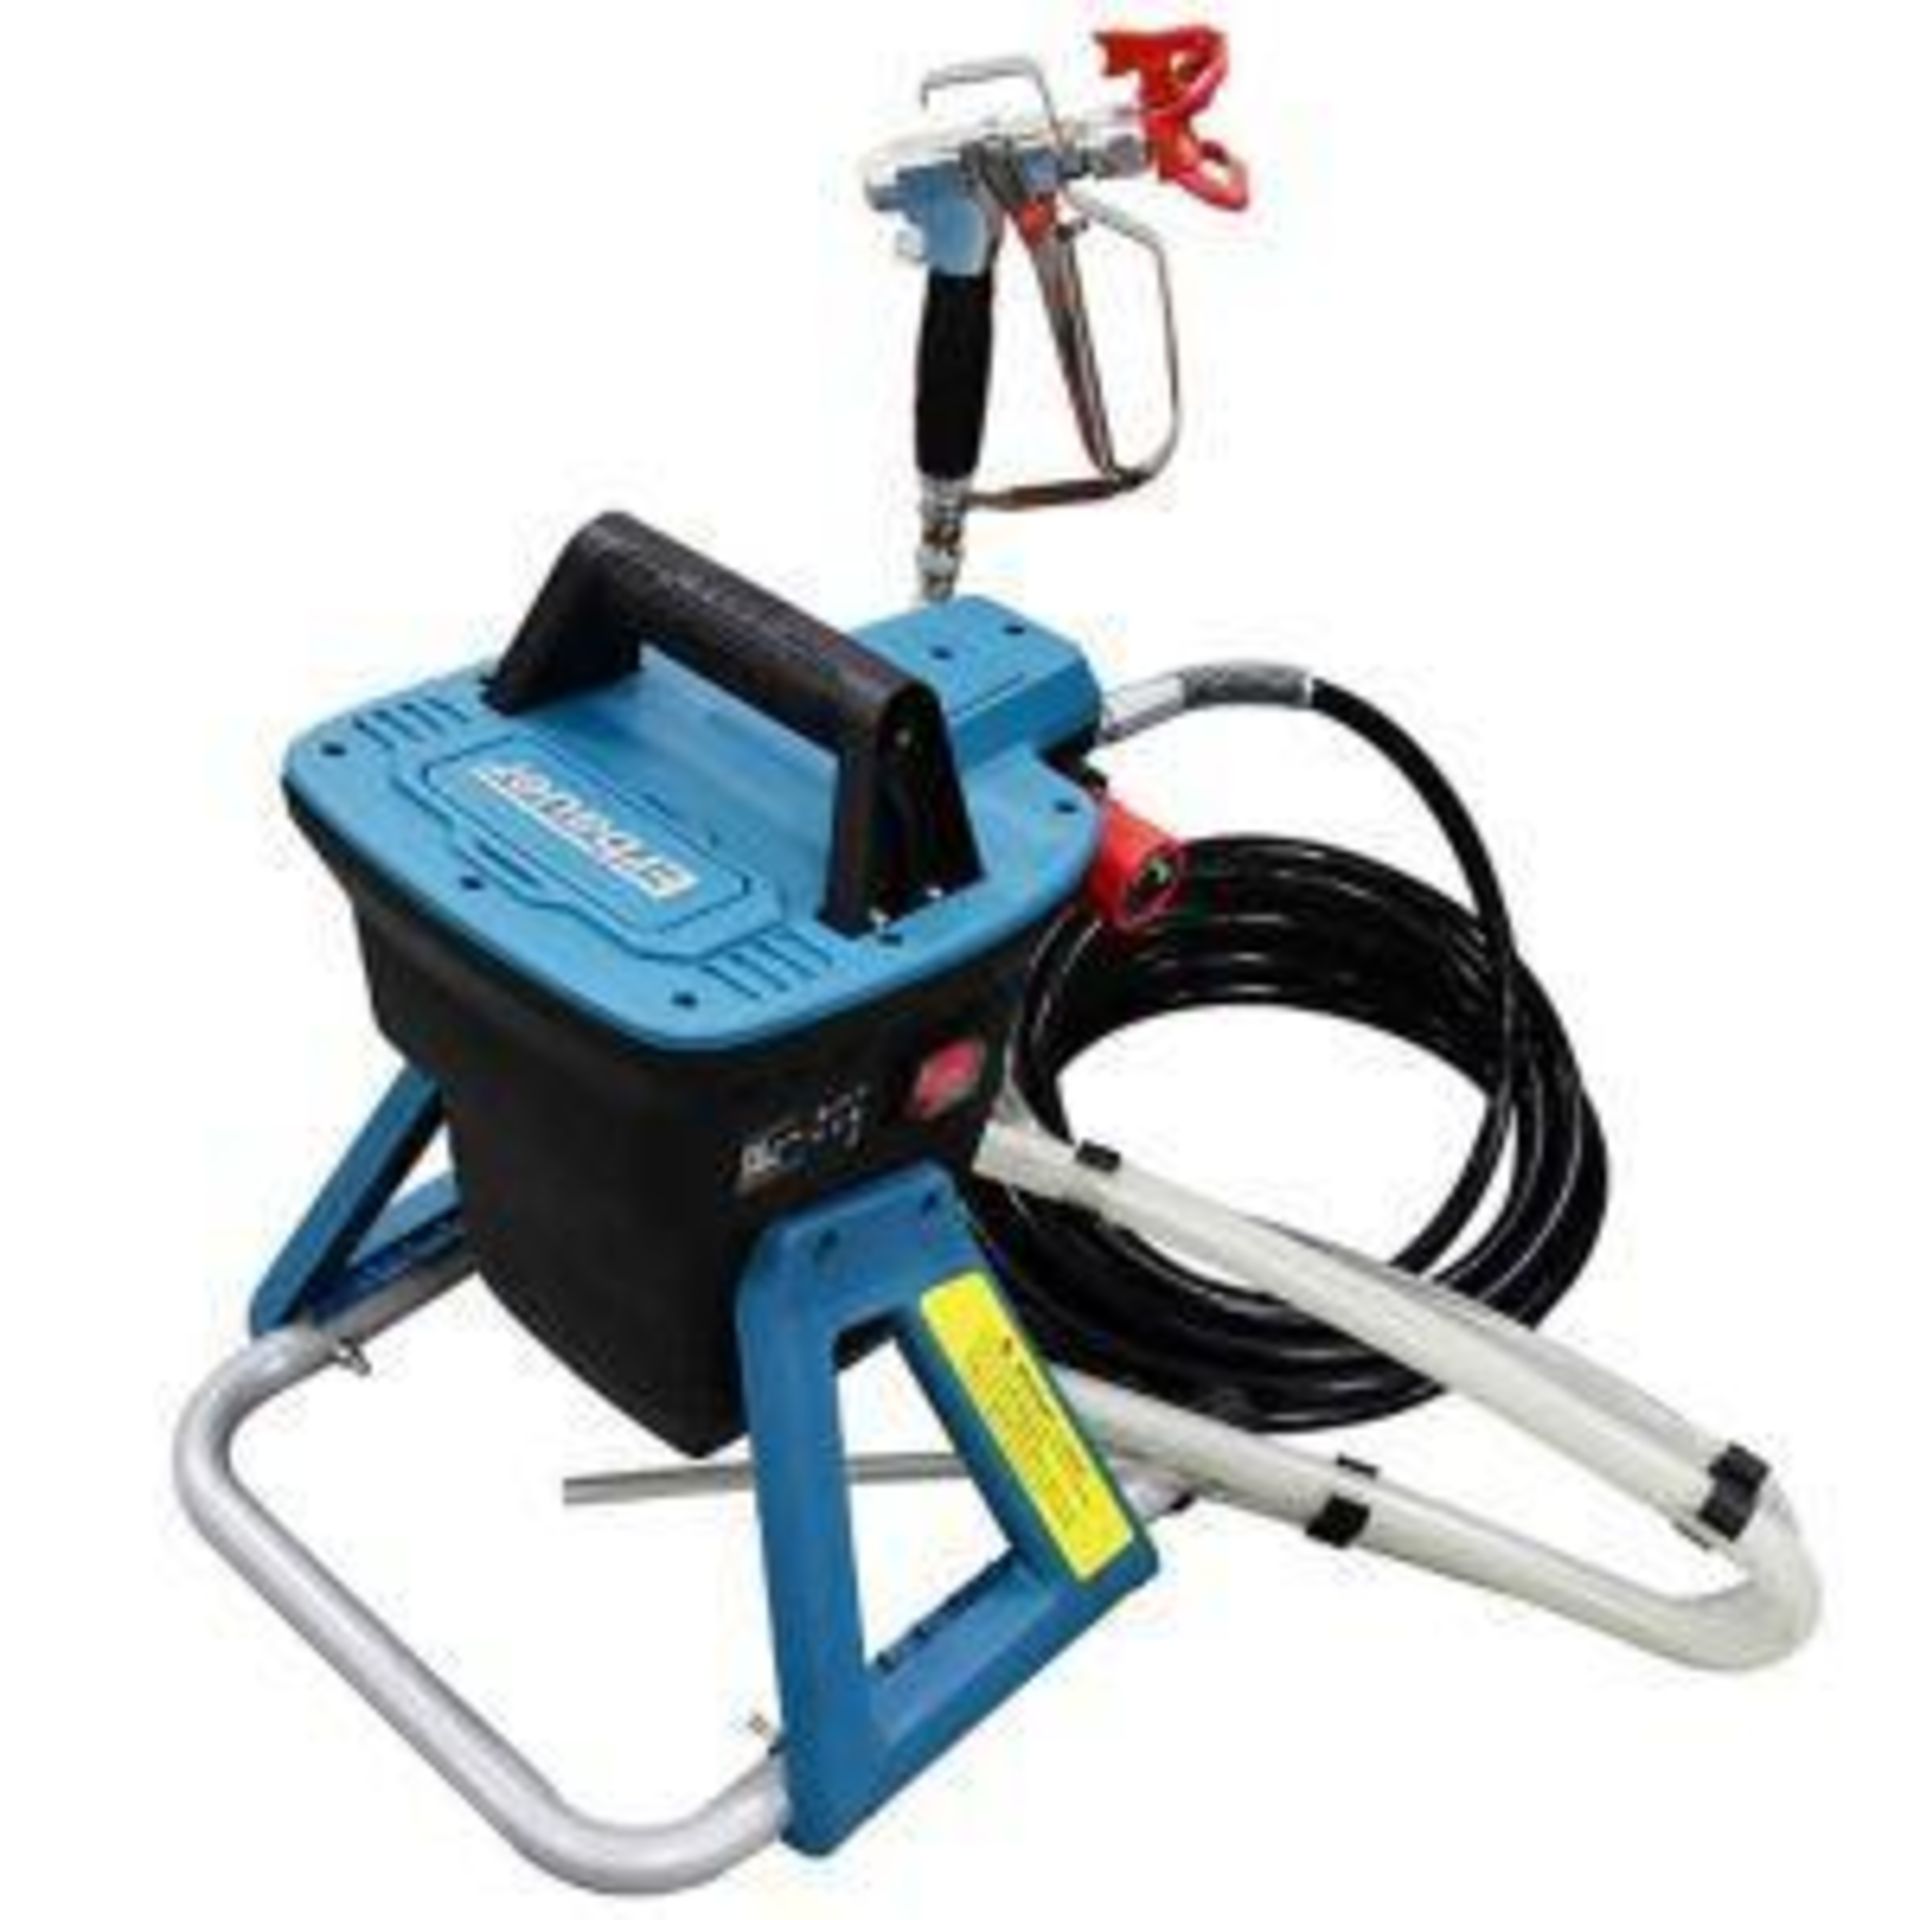 Erbauer 240V 600W Multi-Purpose Airless Paint Sprayer Eaps600 - P4. High efficiency airless paint